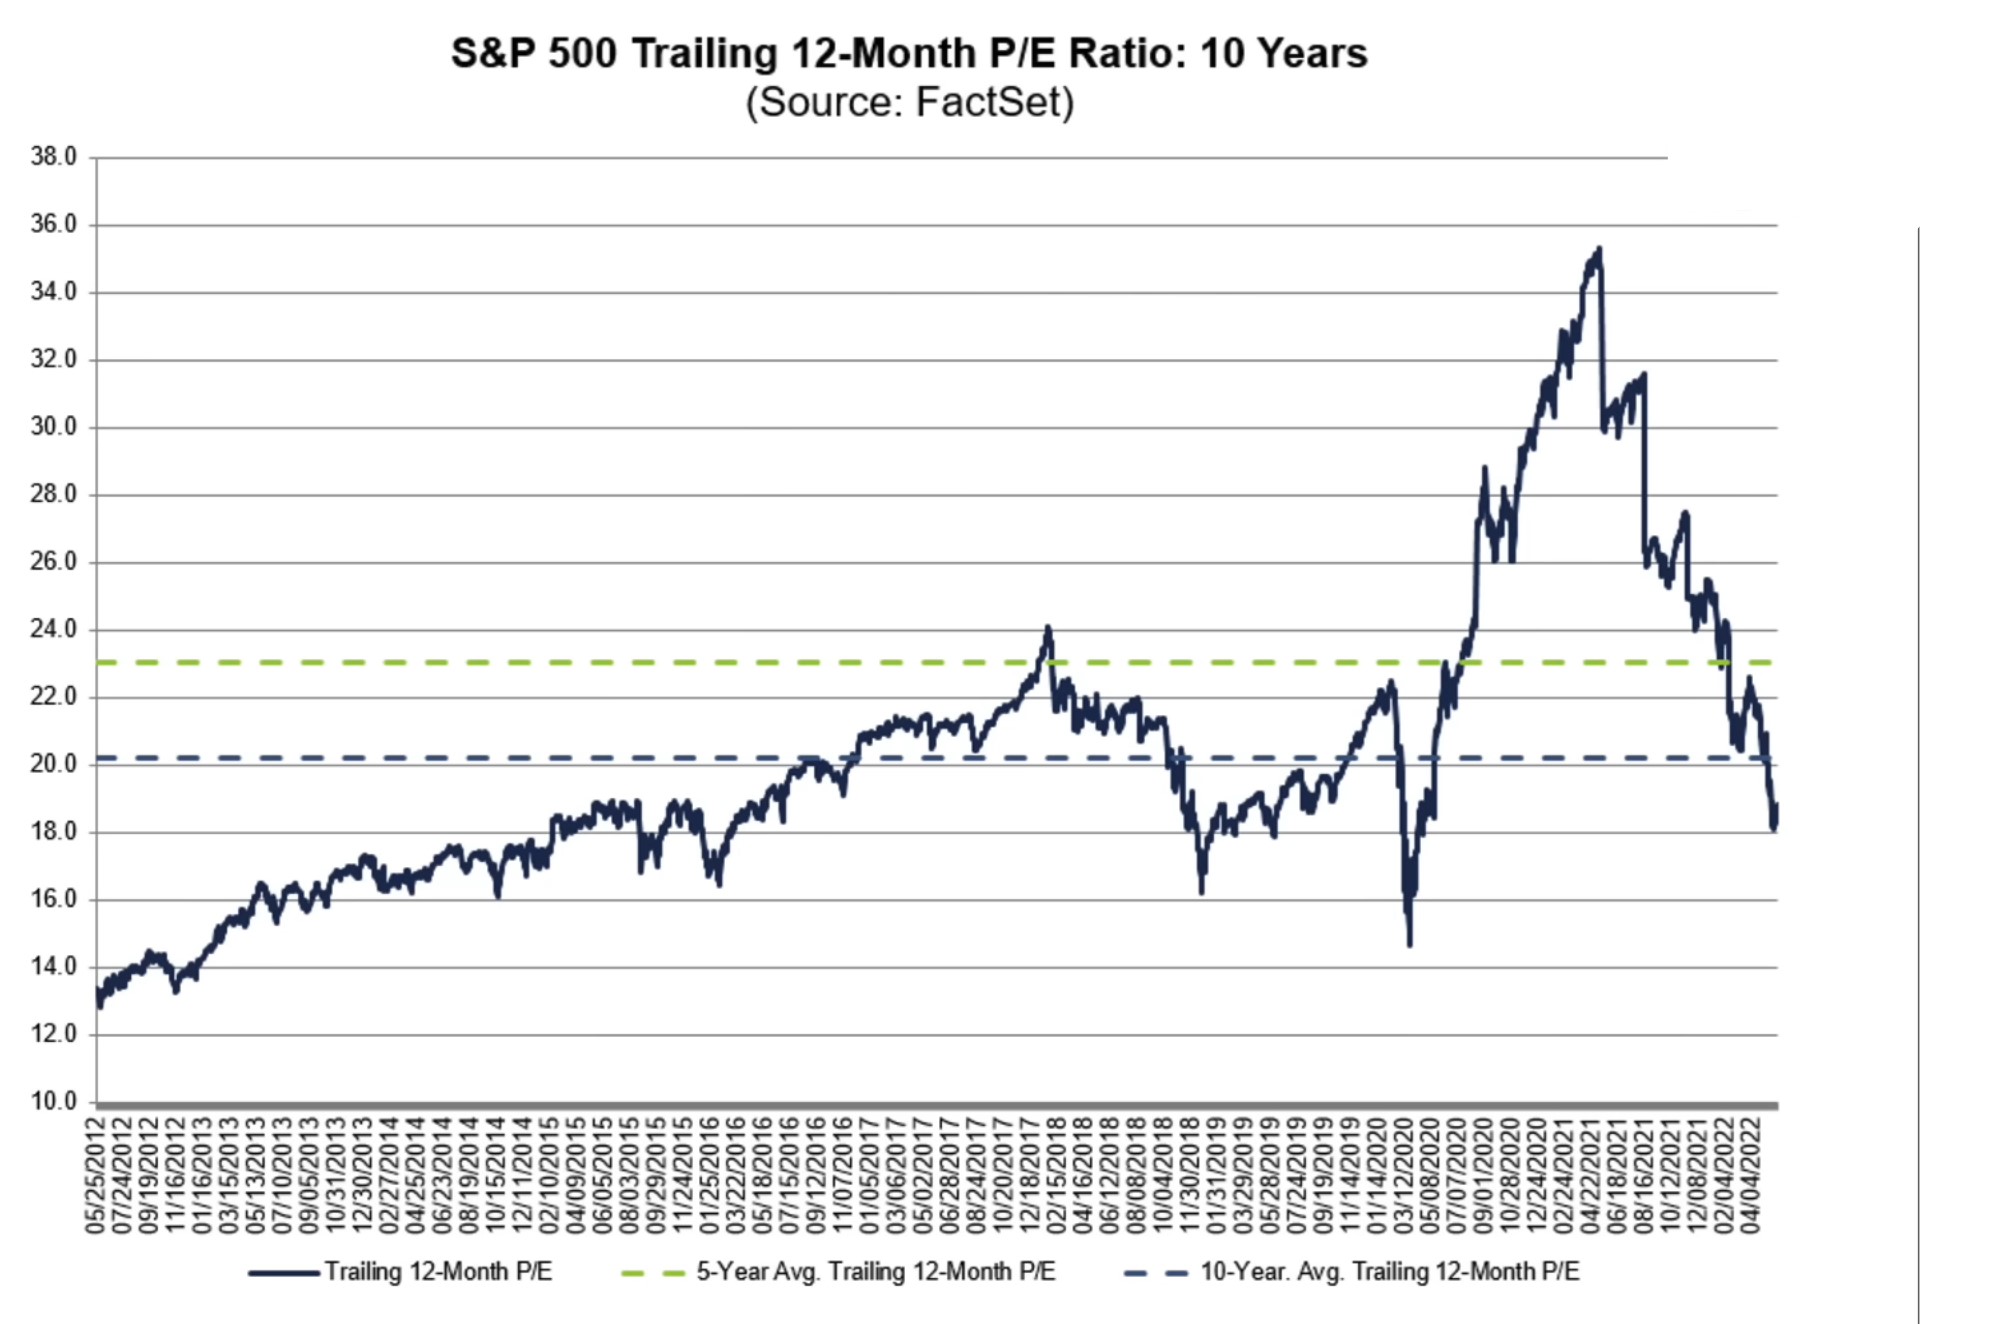 19-19 SP 500 Trailing 12-month PE Ratio 10 years